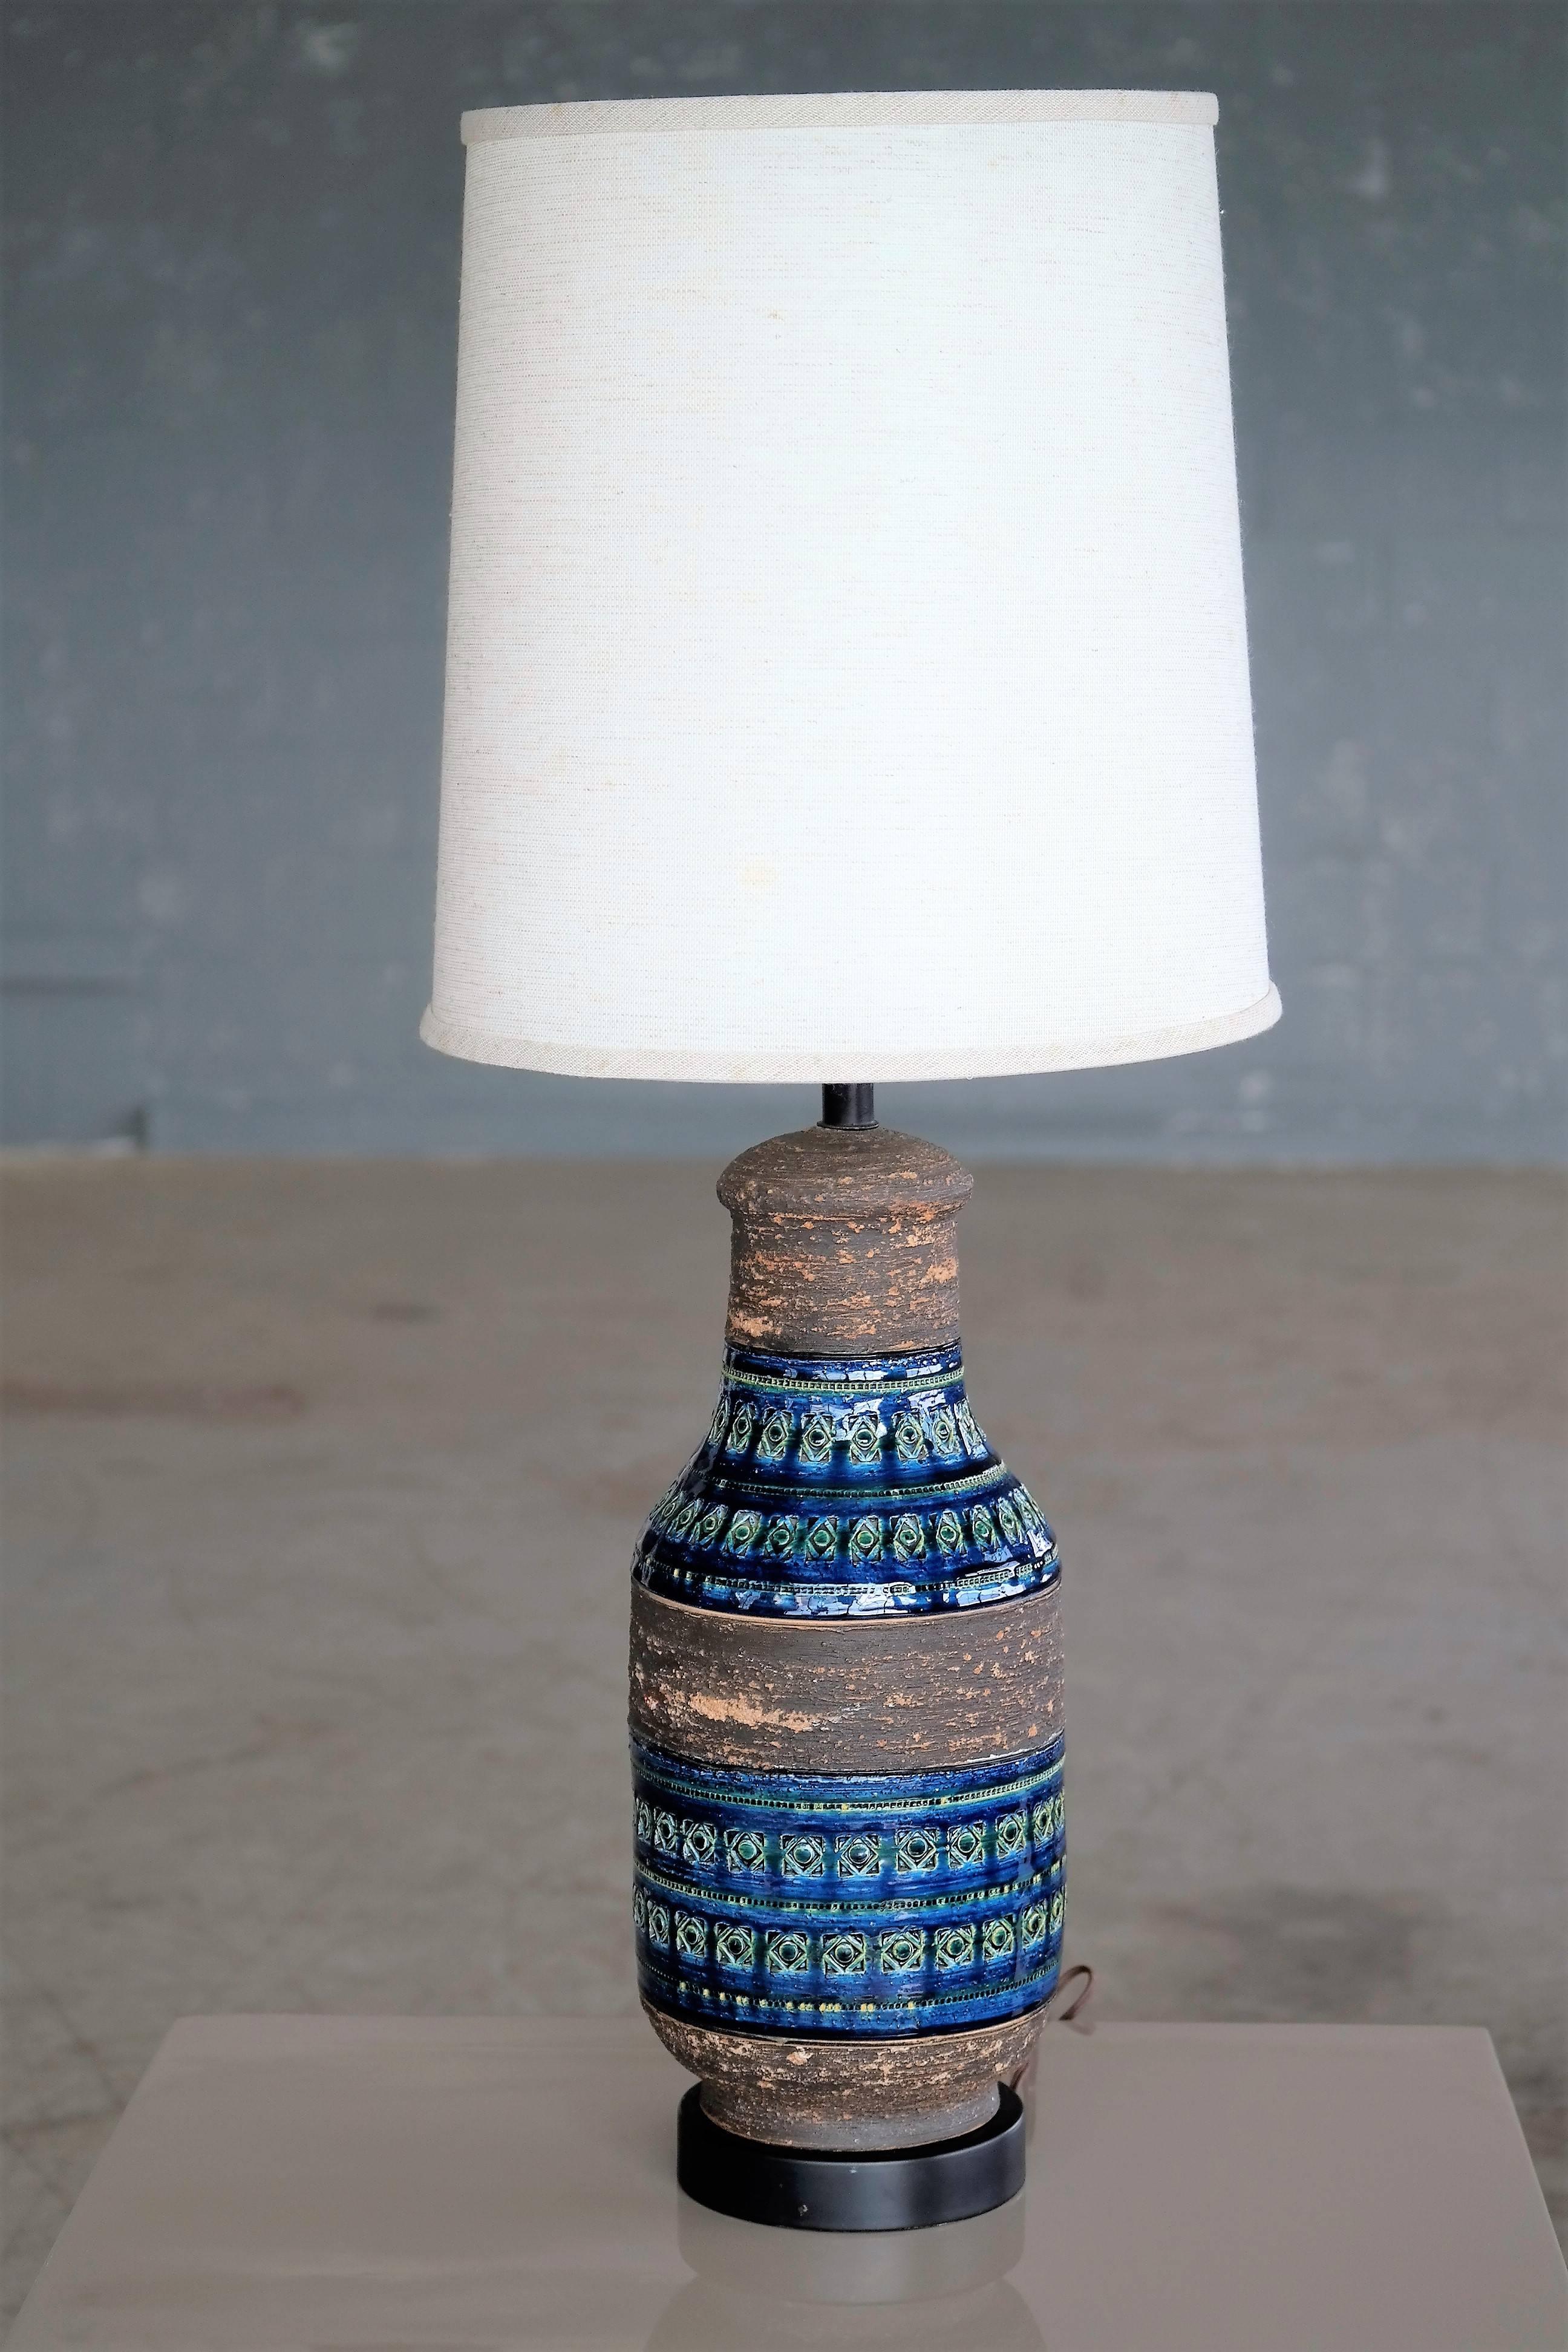 A very large and extremely rare lamp base designed in 1959 by Aldo Londi for Bitossi Ceramiche for the collection Rimini Blu. This handmade Mid-Century Modern ceramic lamp is cylindrical shaped. The deep blue glaze varies in blue/turquoise shades